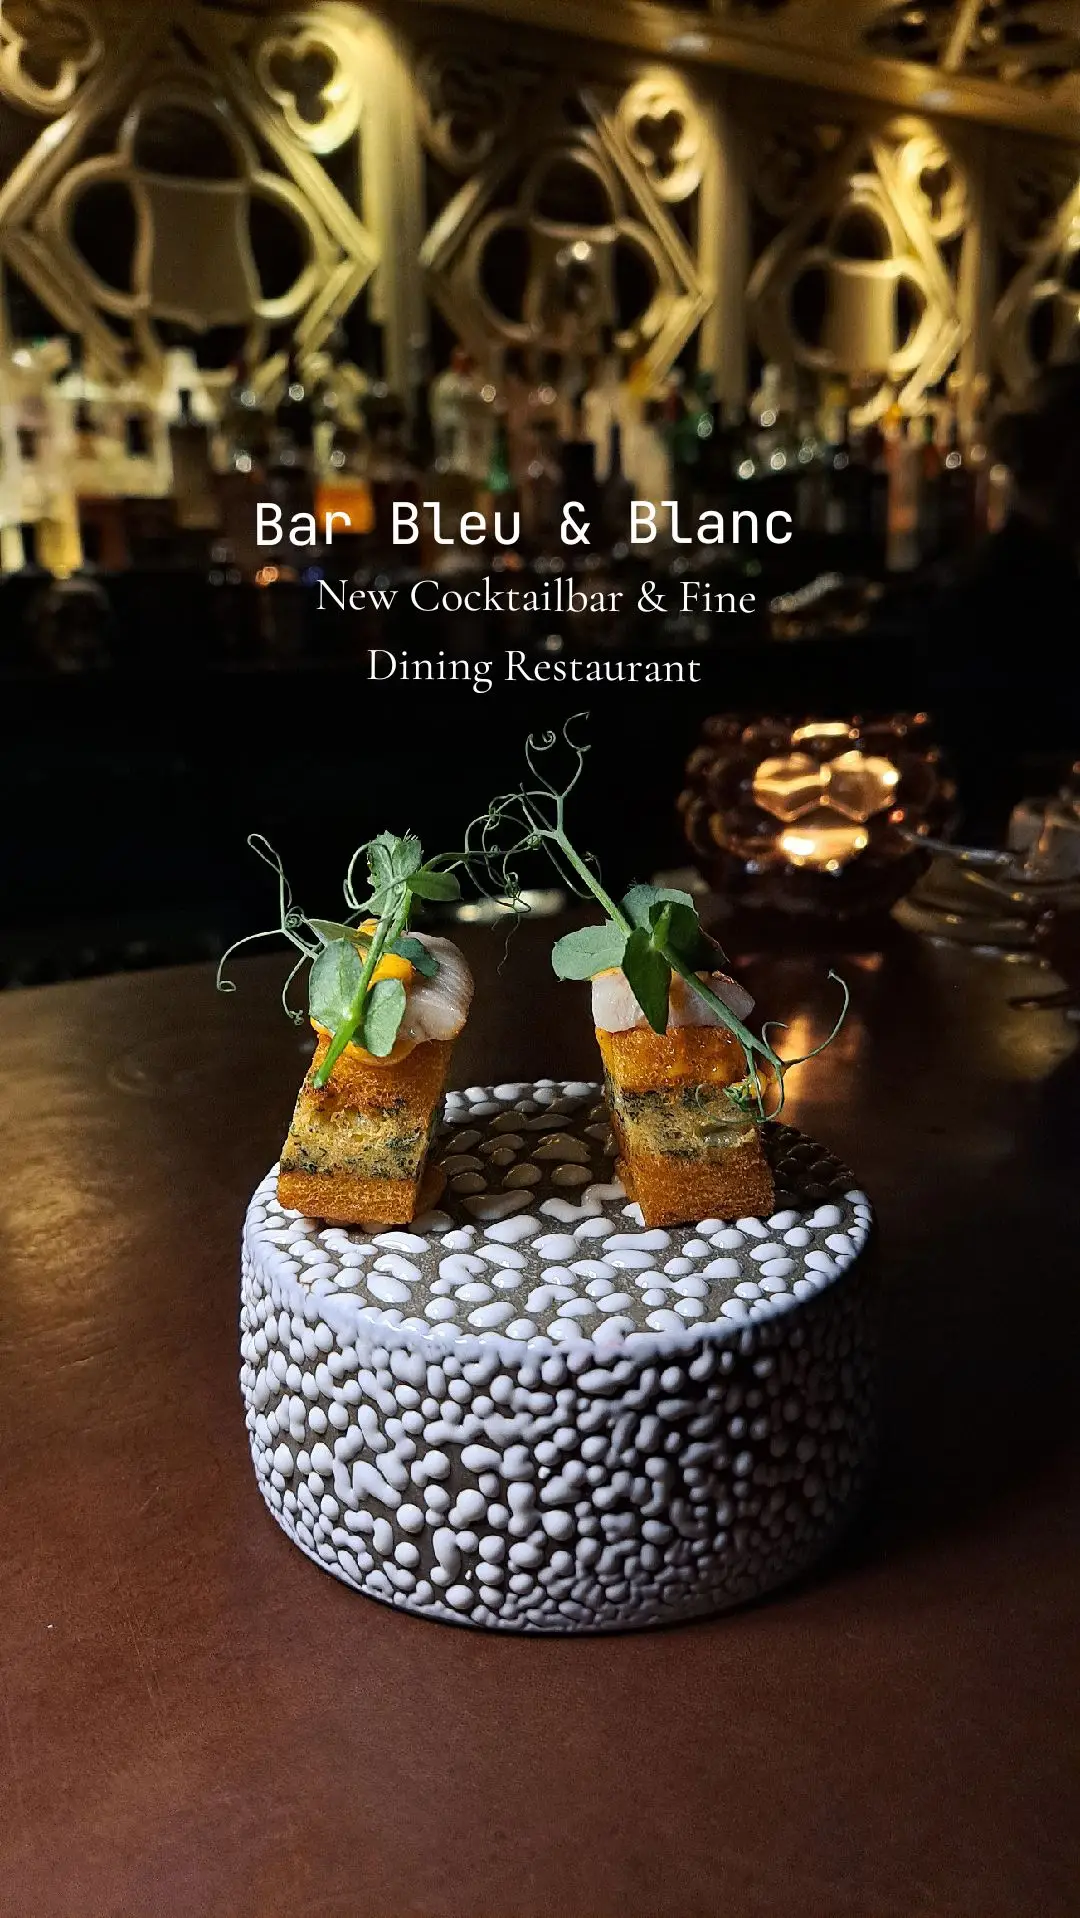 BLANC & BAR BLEU 📍De Burburestraat 4, 2000 Antwerpen  This gem is the newest addition to the culinary city of Antwerp. Chef Ayt Ems already earned his stripes in Sint-Truiden. In 2021 his restaurant Blanc was rewarded with the titel 